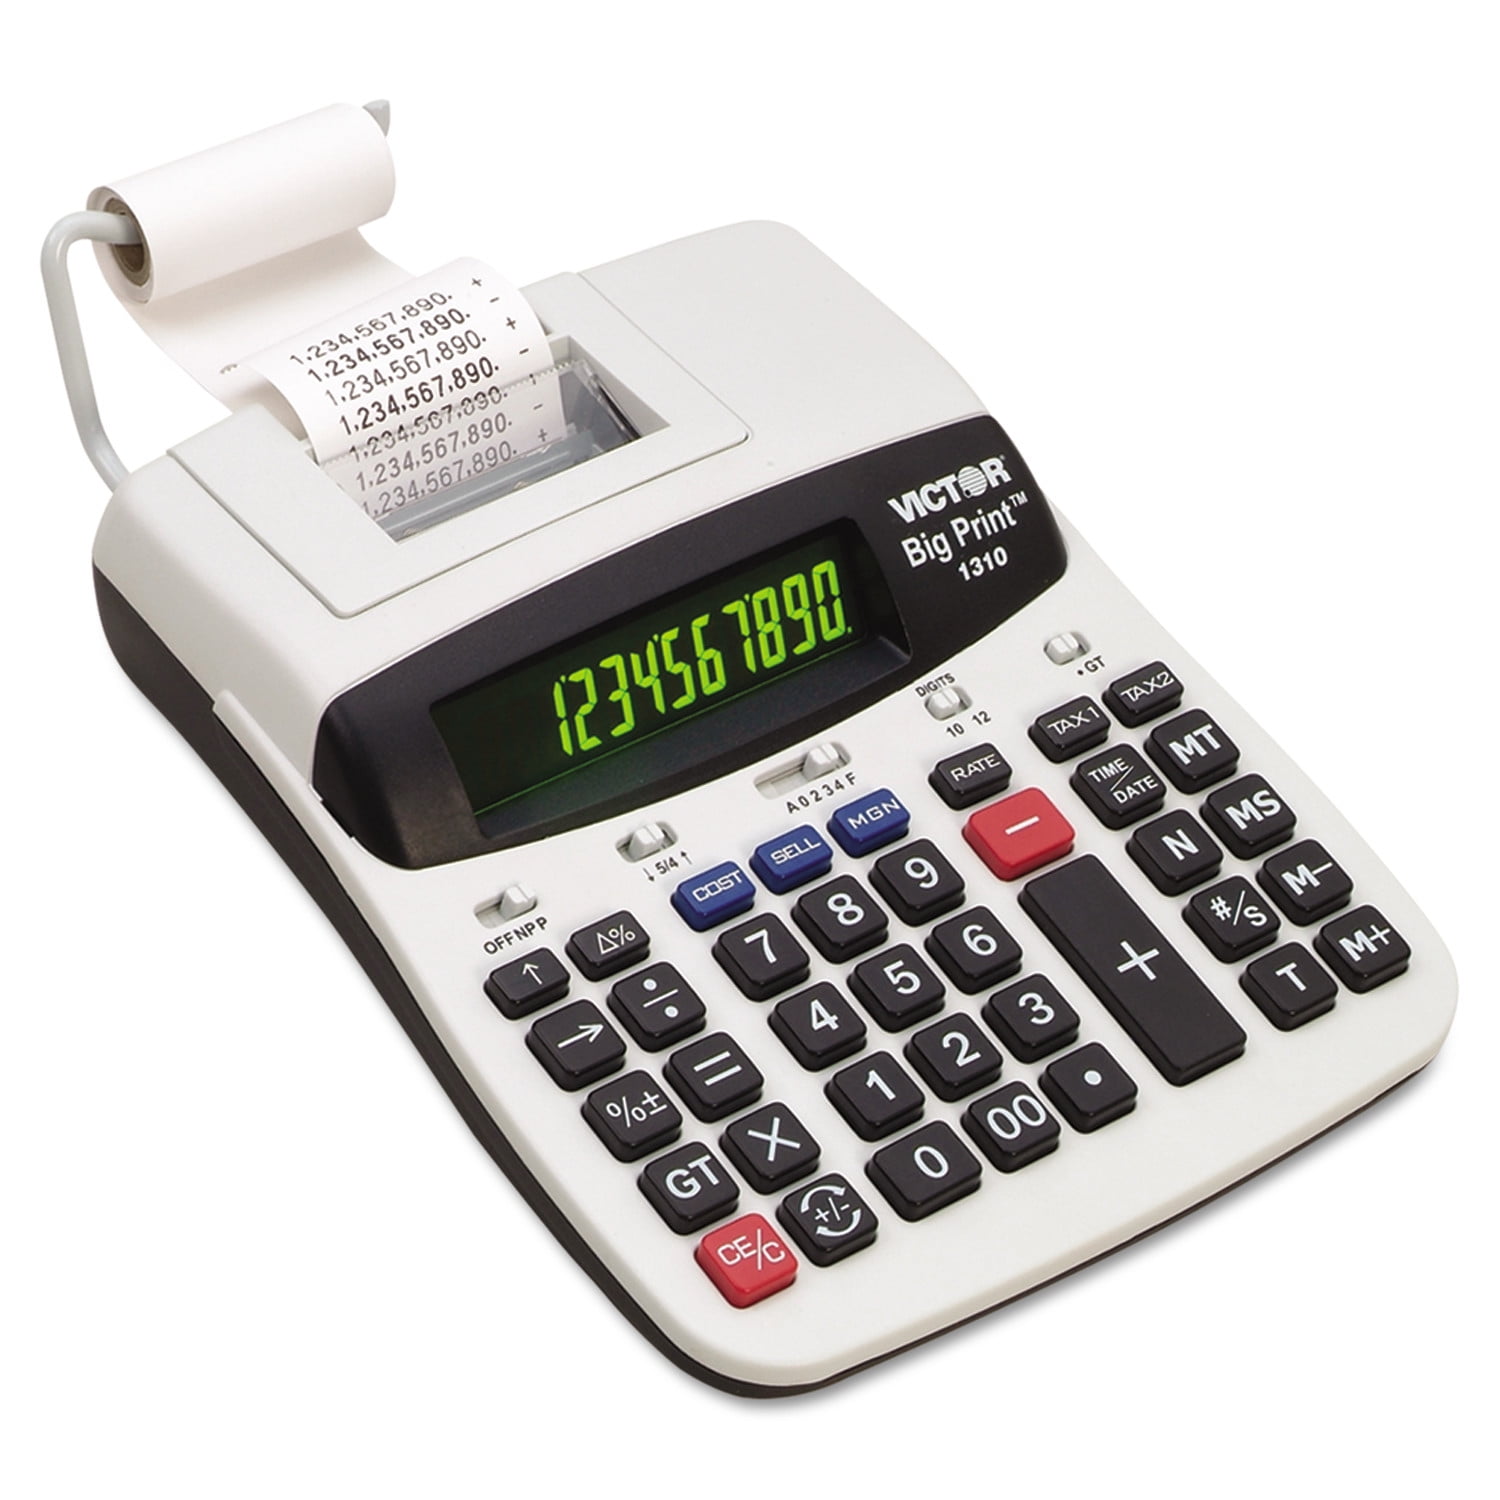 Canon P1-DHV Printing Calculator for sale online 